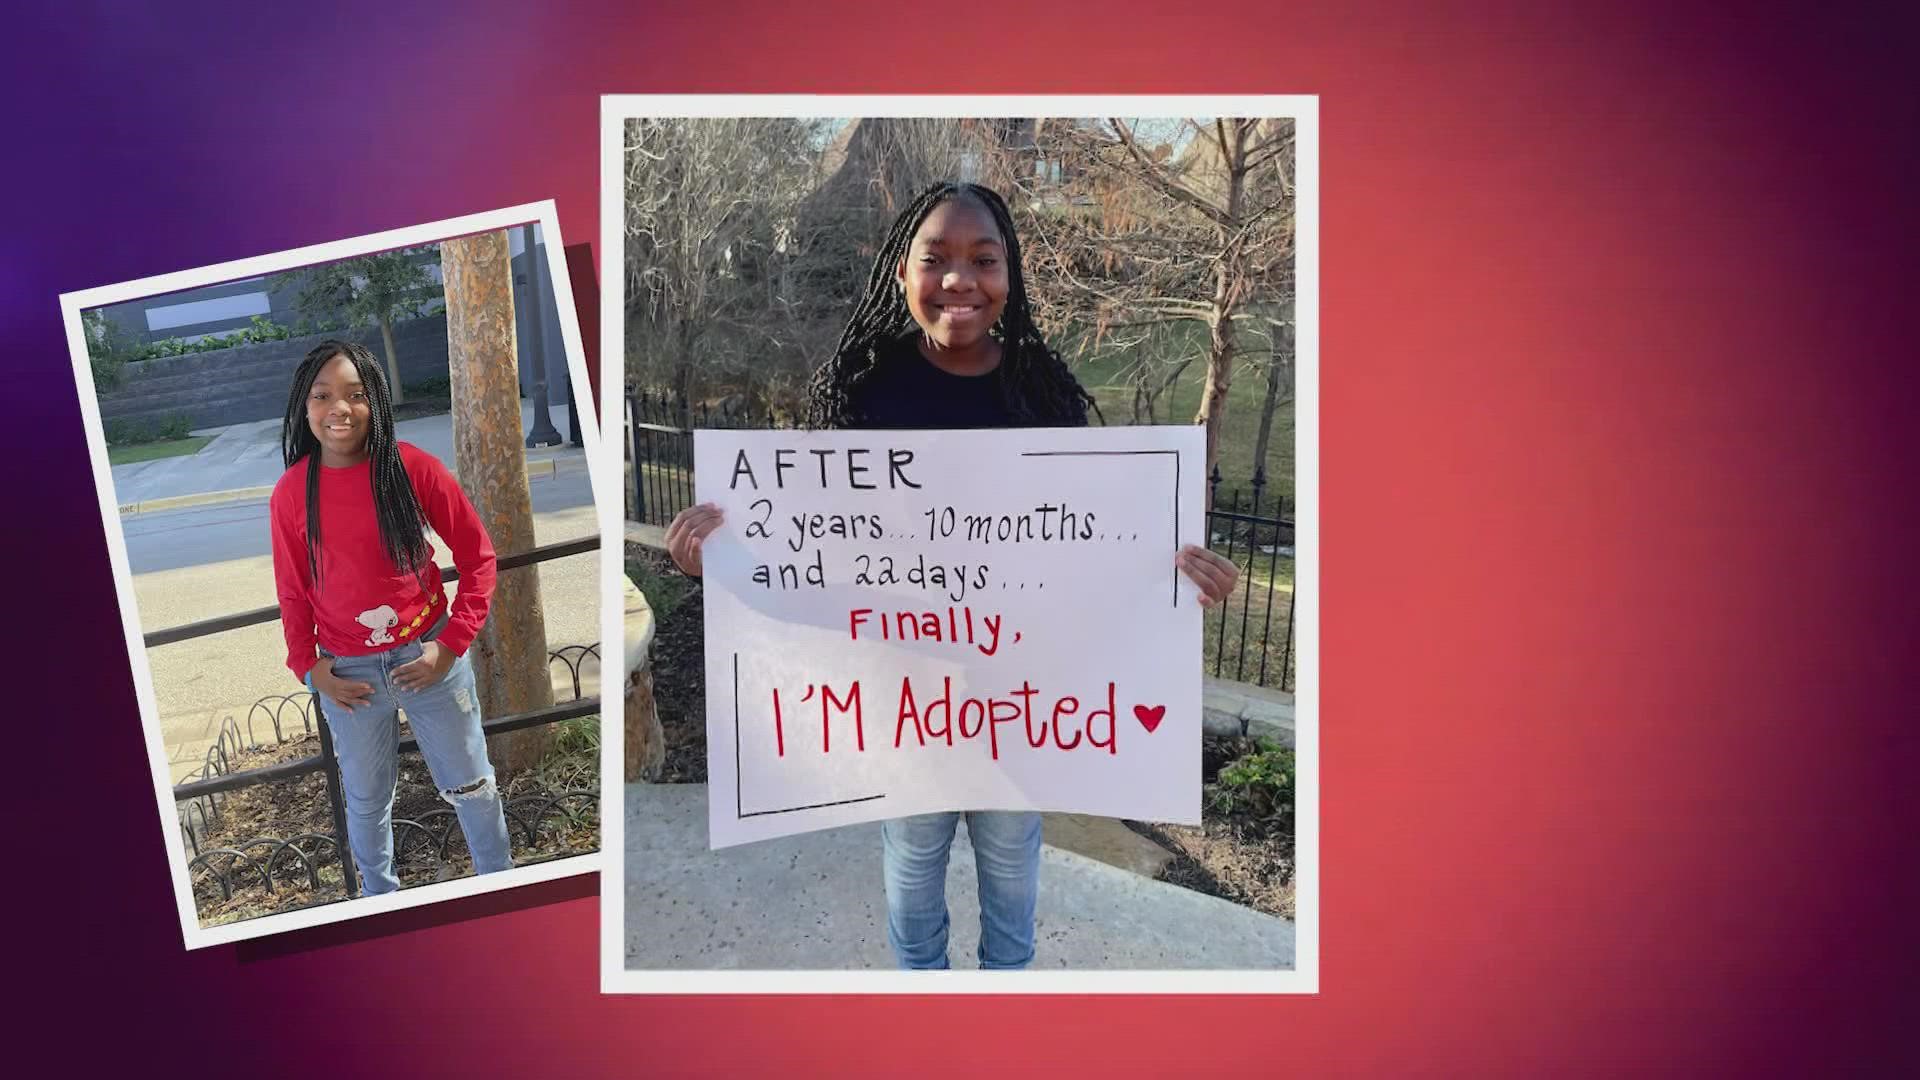 Ja'Mya was adopted on Jan. 5, after spending almost three years in foster care. She recorded this message for us from her new home.